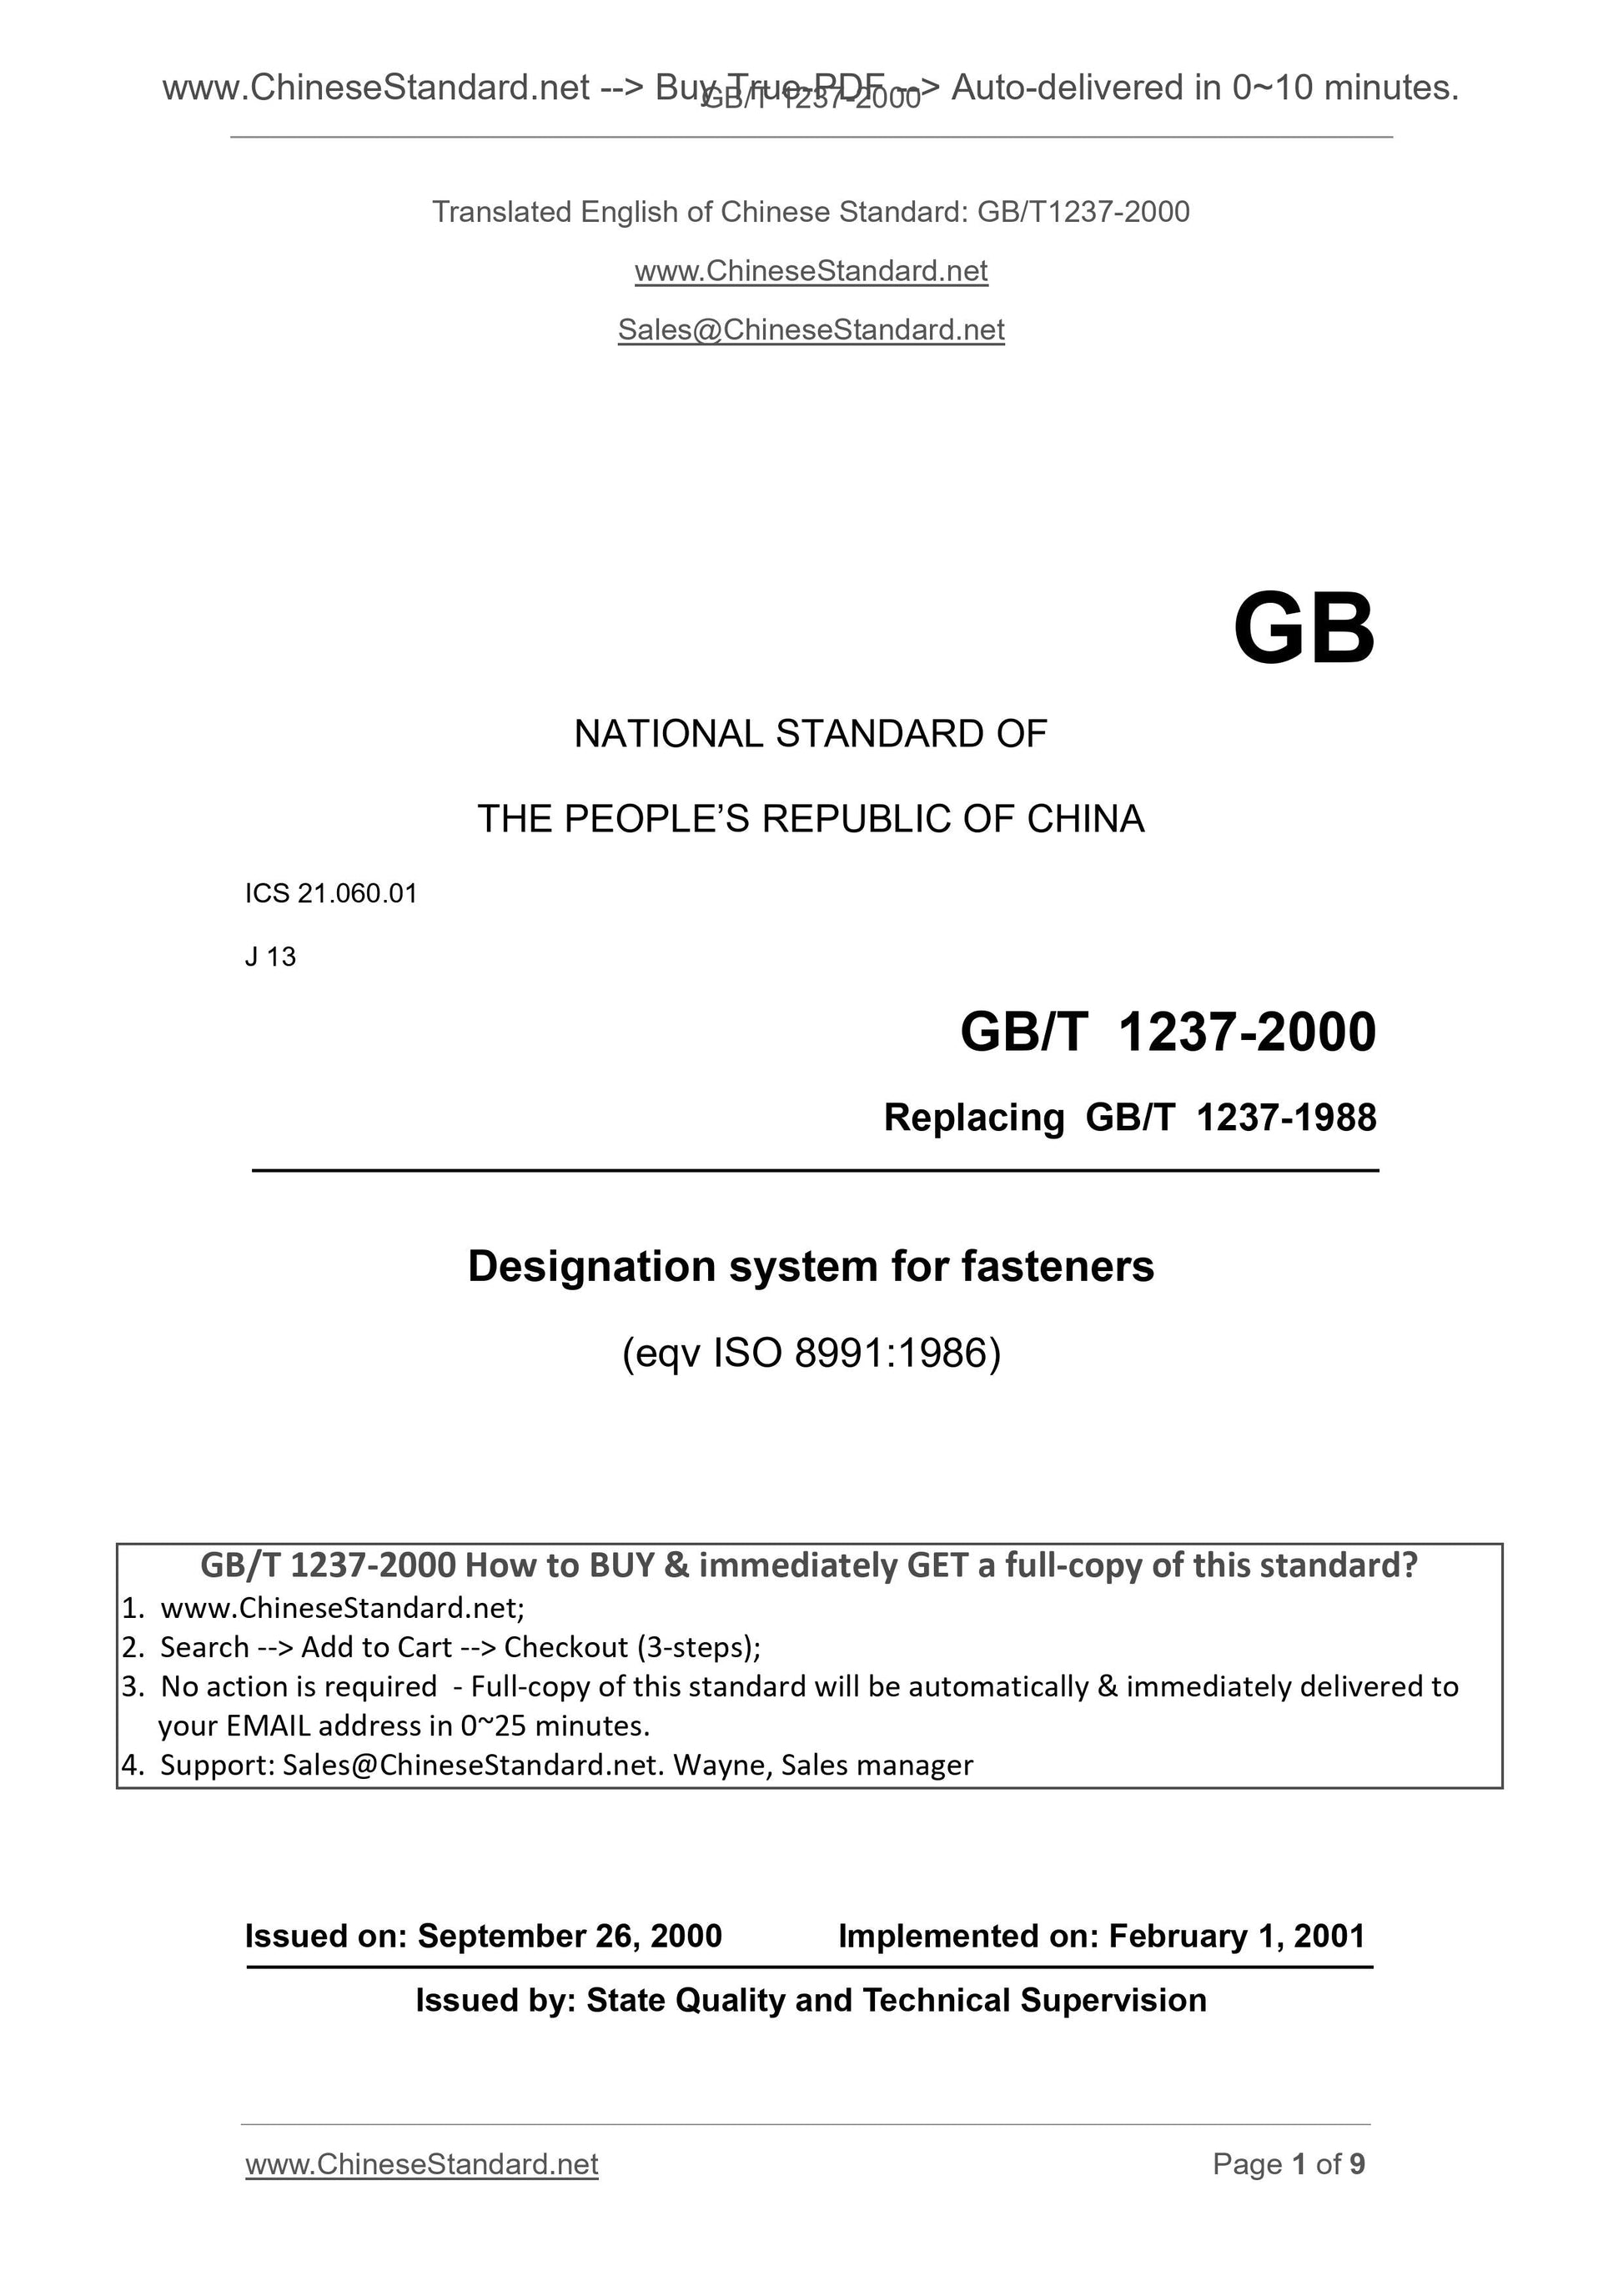 GB/T 1237-2000 Page 1